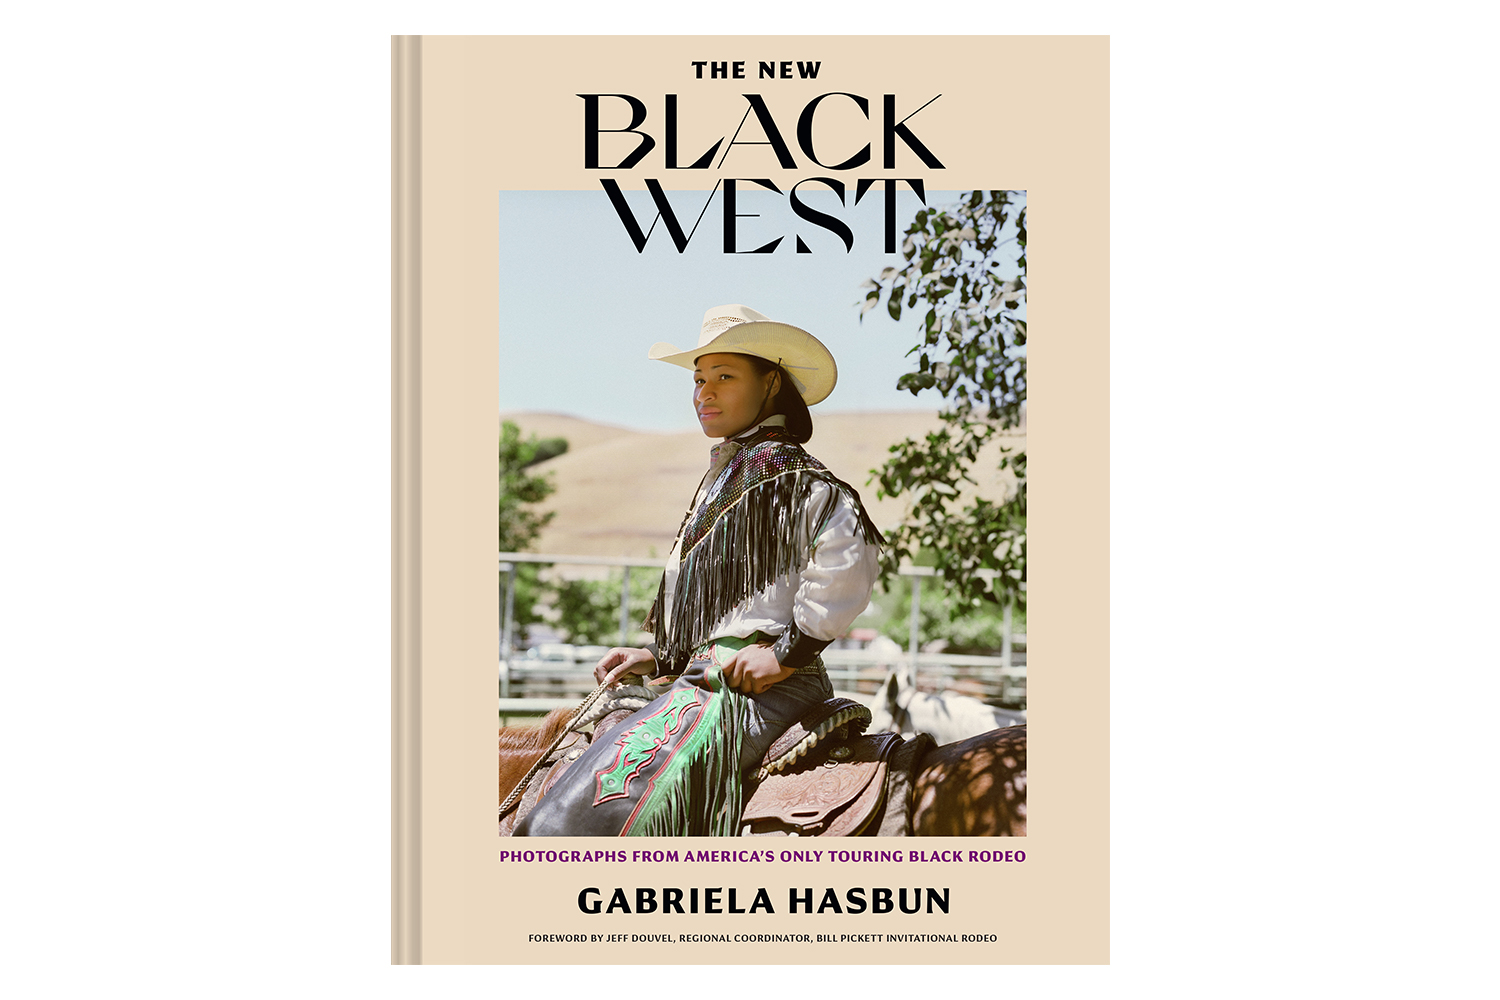 The cover of Gabriela Hasbun's new book "The New Black West"